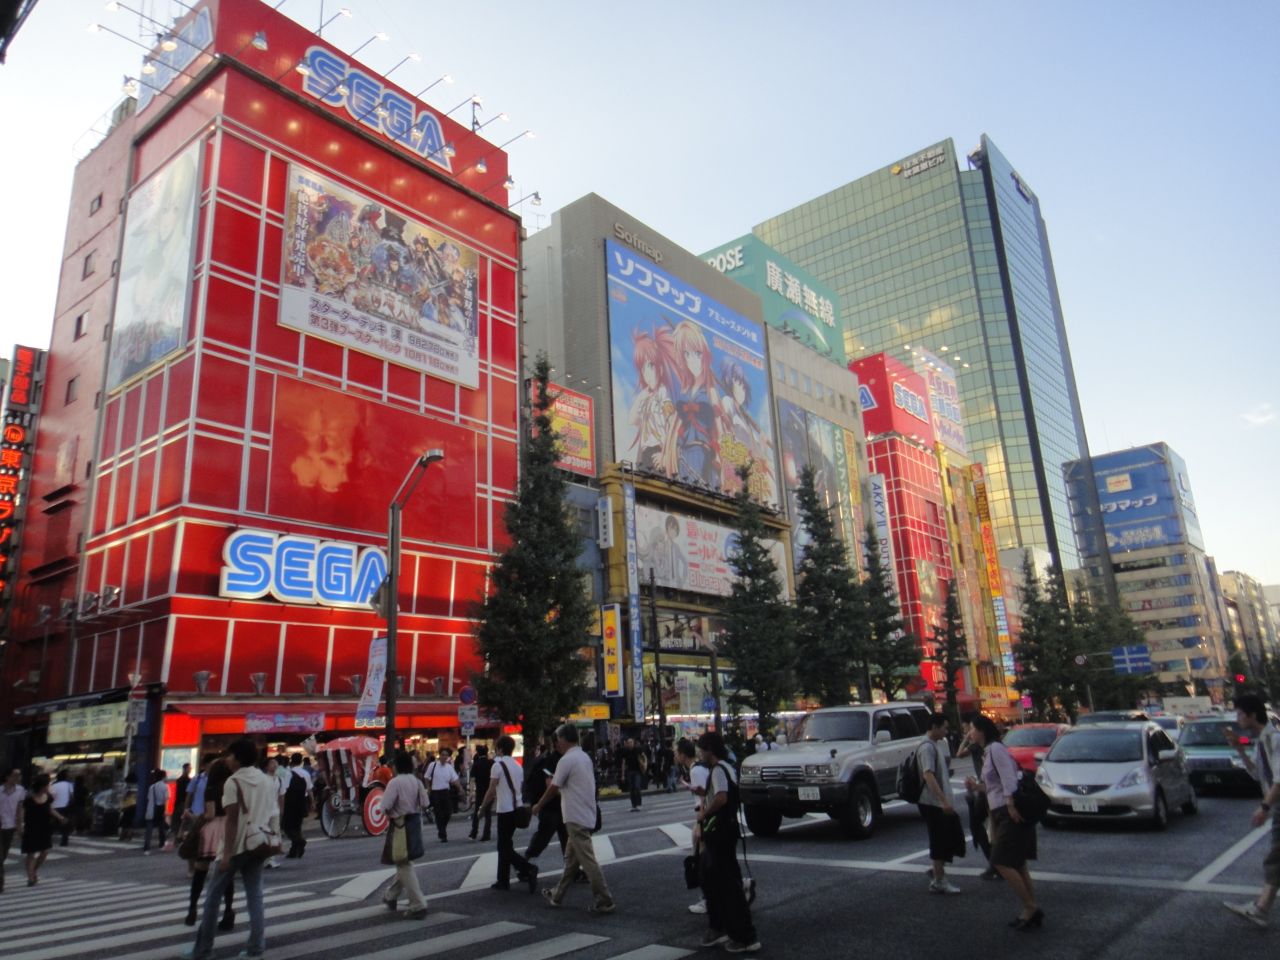 It's hard to ignore Tokyo's electronics district. Whether you're looking for comics, video games or anime, Akihabara has it all. Having dreamt of going for years, iReporter Mathieu Castel says it felt like home when he finally went. "It's big, it's magic and you feel how small you are in front of it all," he said. "I've never had that feeling anywhere else before." <br /><a href="http://ireport.cnn.com/docs/DOC-841866" target="_blank">Learn more about his Akihabara experience on his iReport</a>.